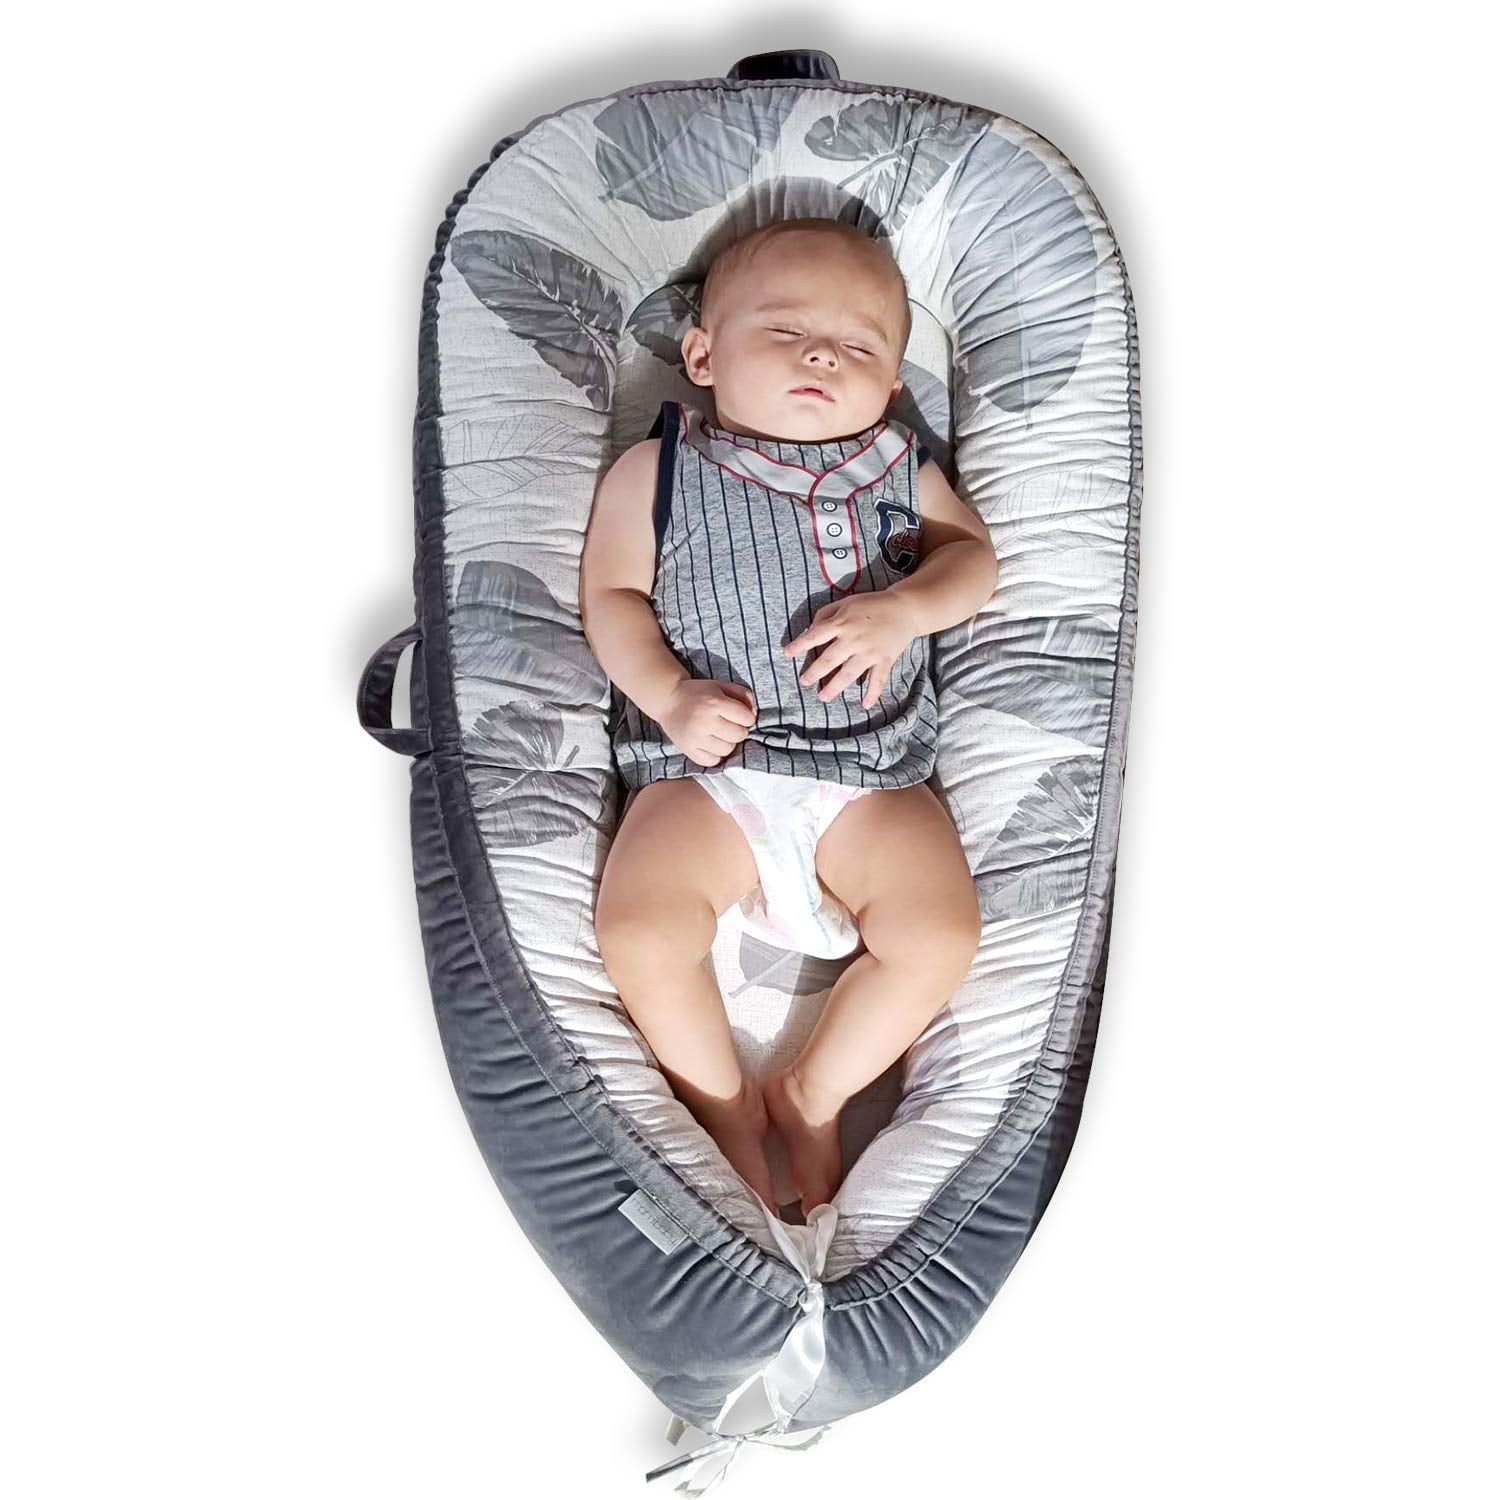 Baby Nest Sleeper for Newborn and Babies Baby Lounger Co Sleeper Infant Snuggle Baby Bassinet Breathable Hypoallergenic Cotton with Pillow and Quilt for Bed/Lounger/Nest/Pod/Cot Bed 35.4x21.7x5.9in 